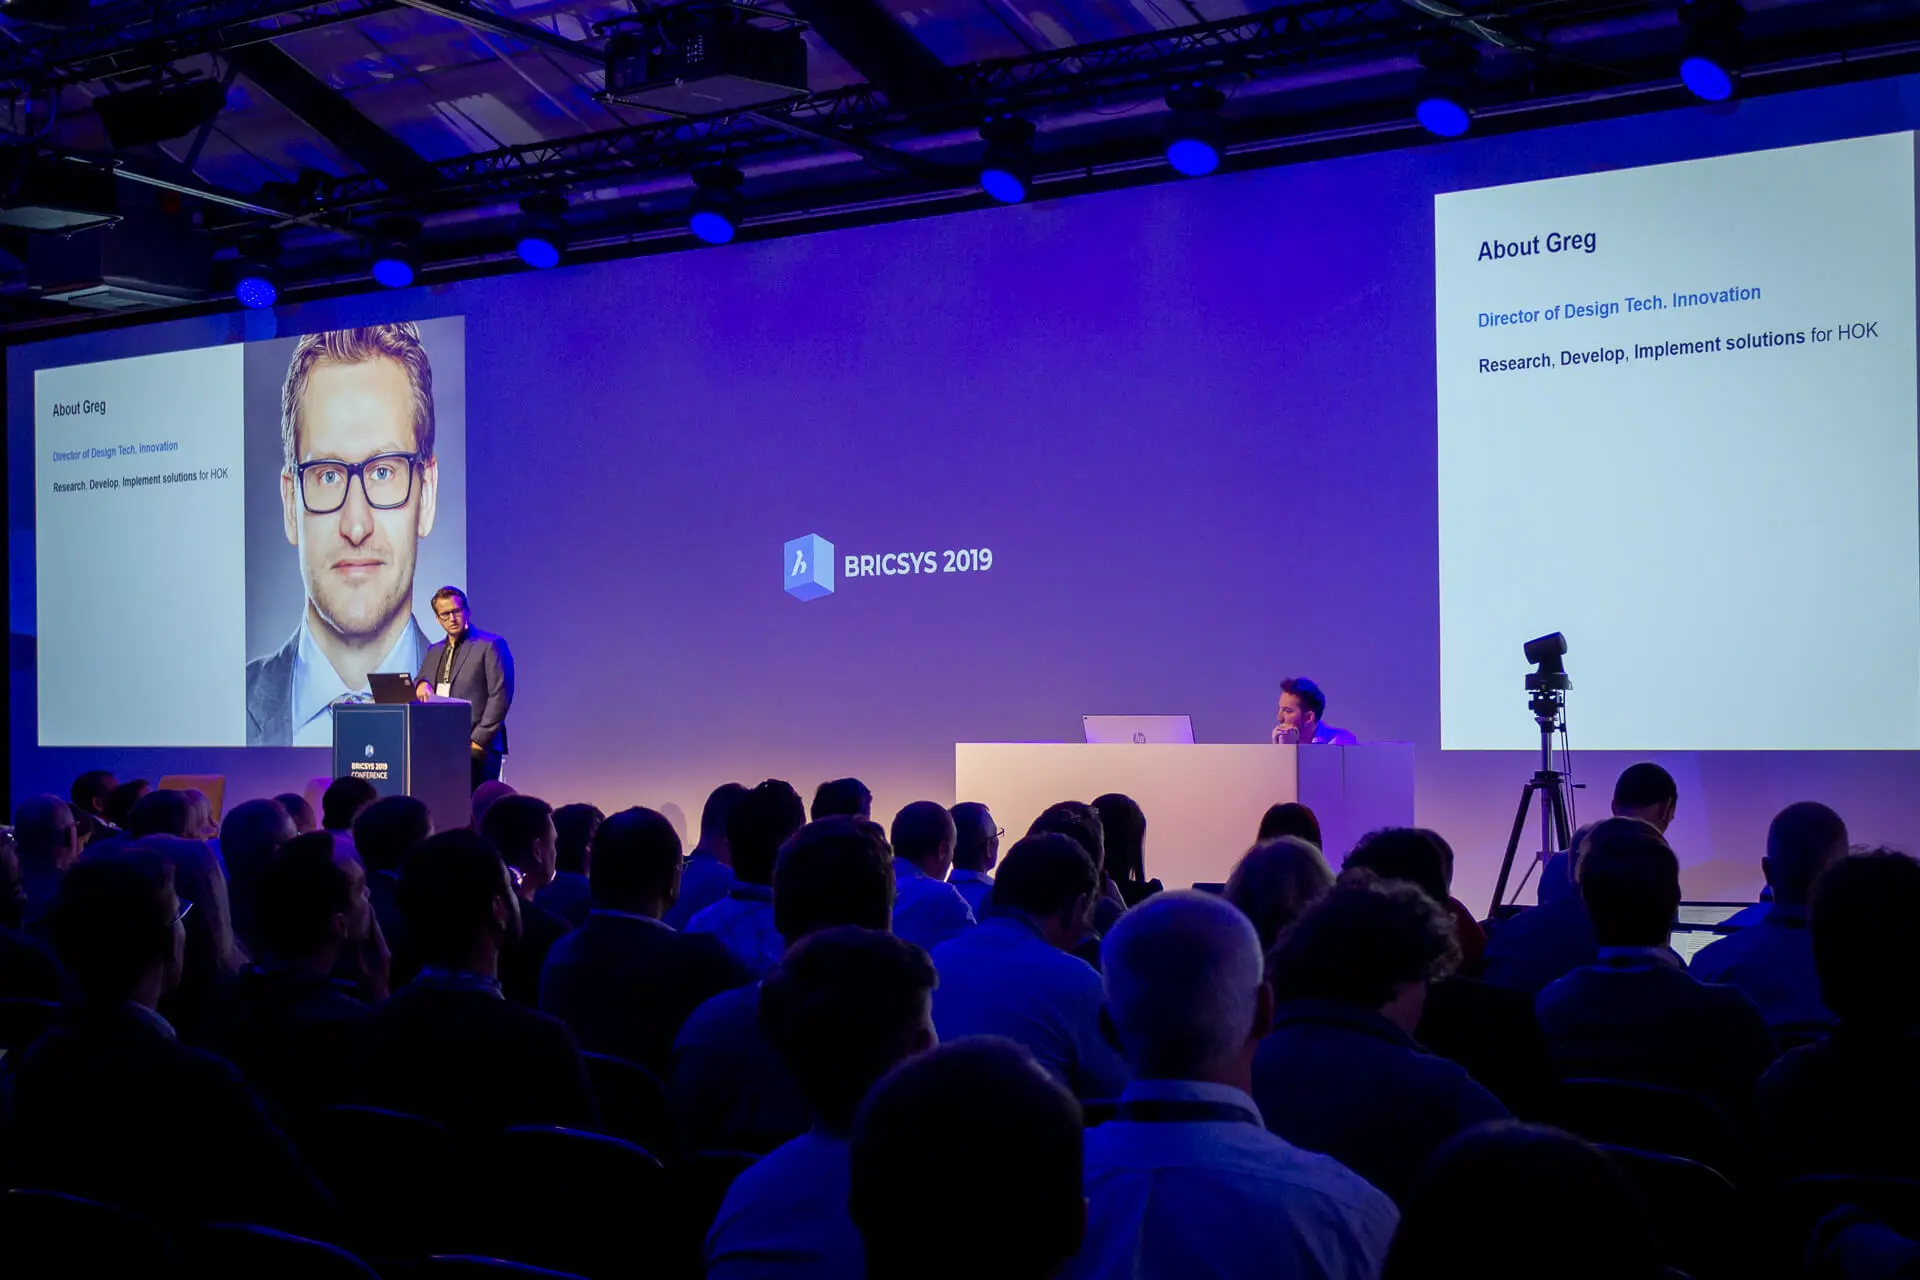 This was Bricsys Conference 2019- IMG 9113